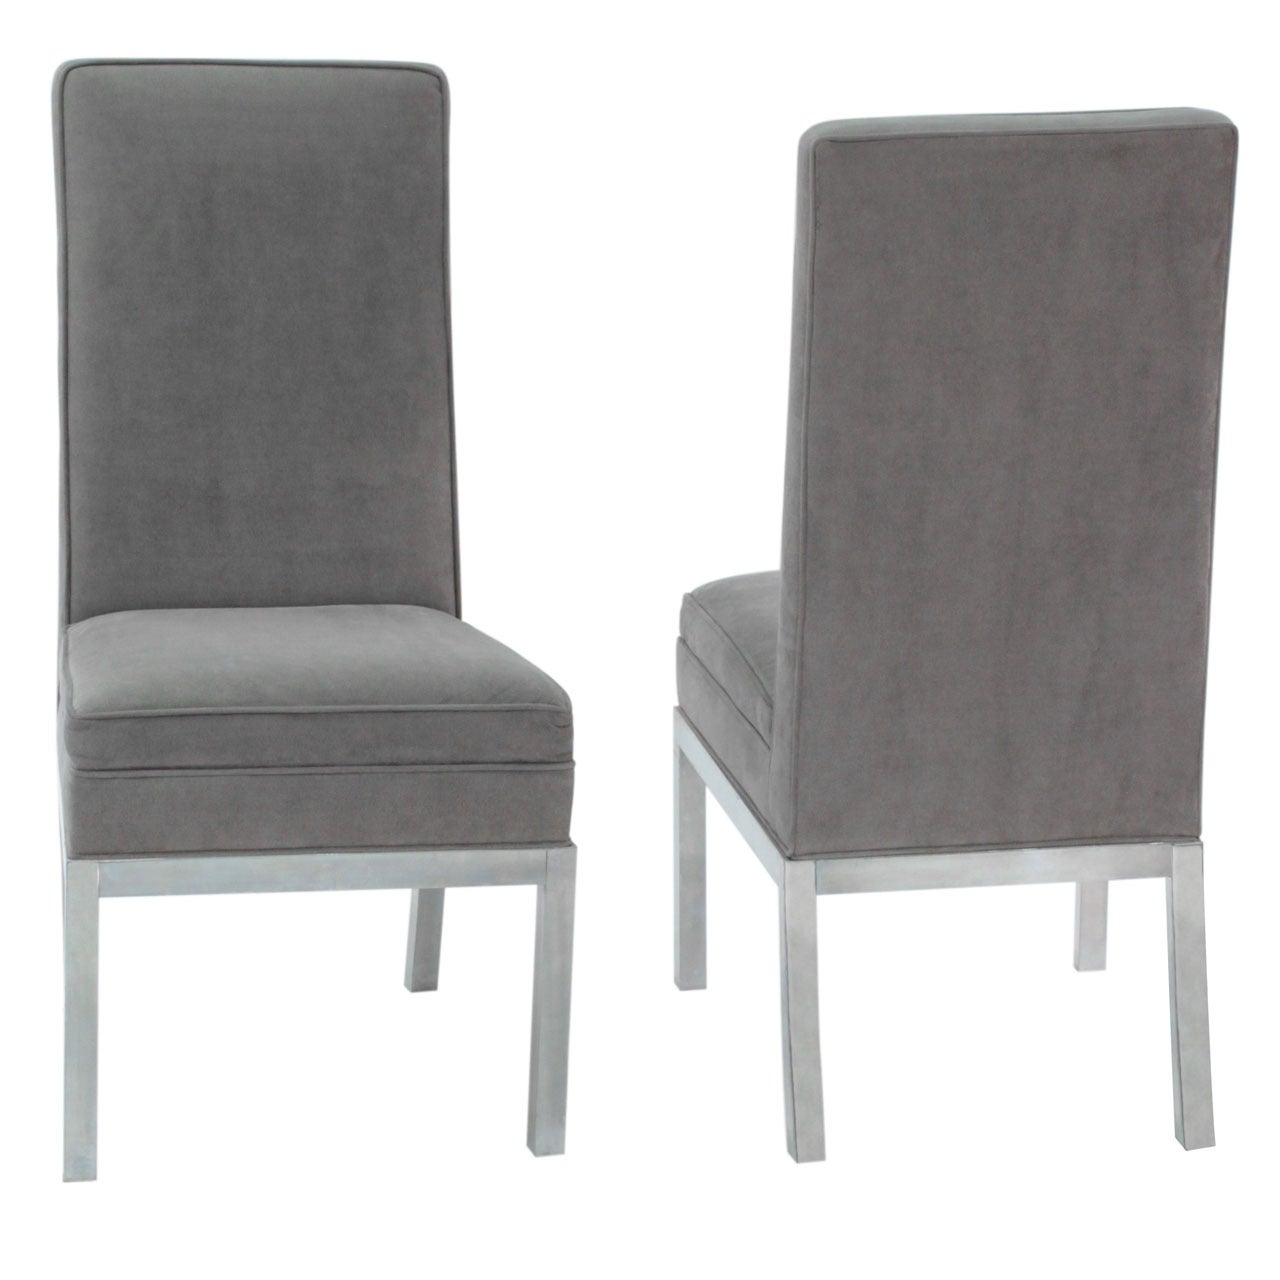 Set of 6 Elegant High Back Dining Chairs